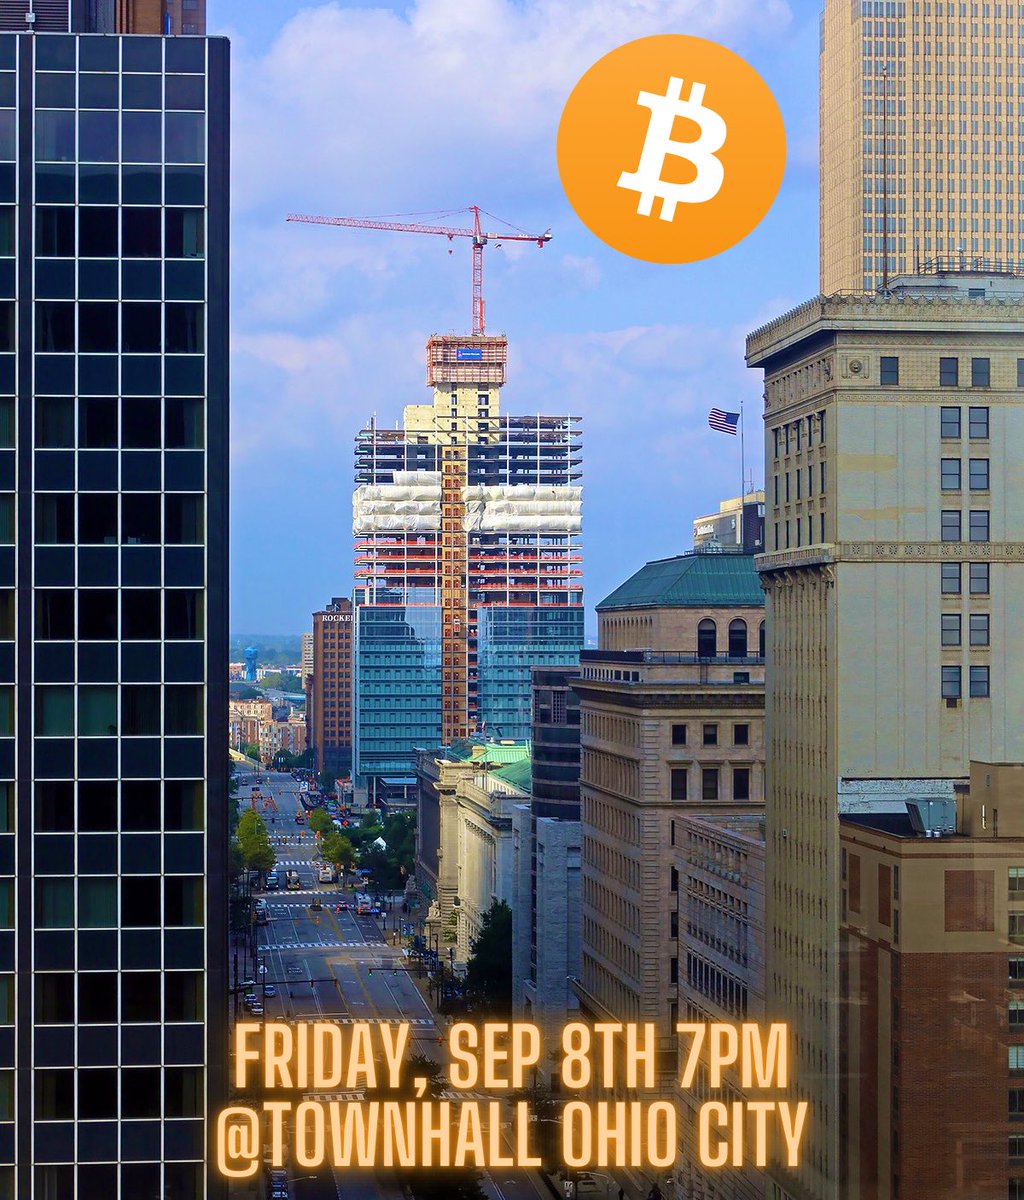 Bear-markets are for building 🏗️🏙️ Next meetup is Friday, September 8th. #Cleveland #Bitcoin